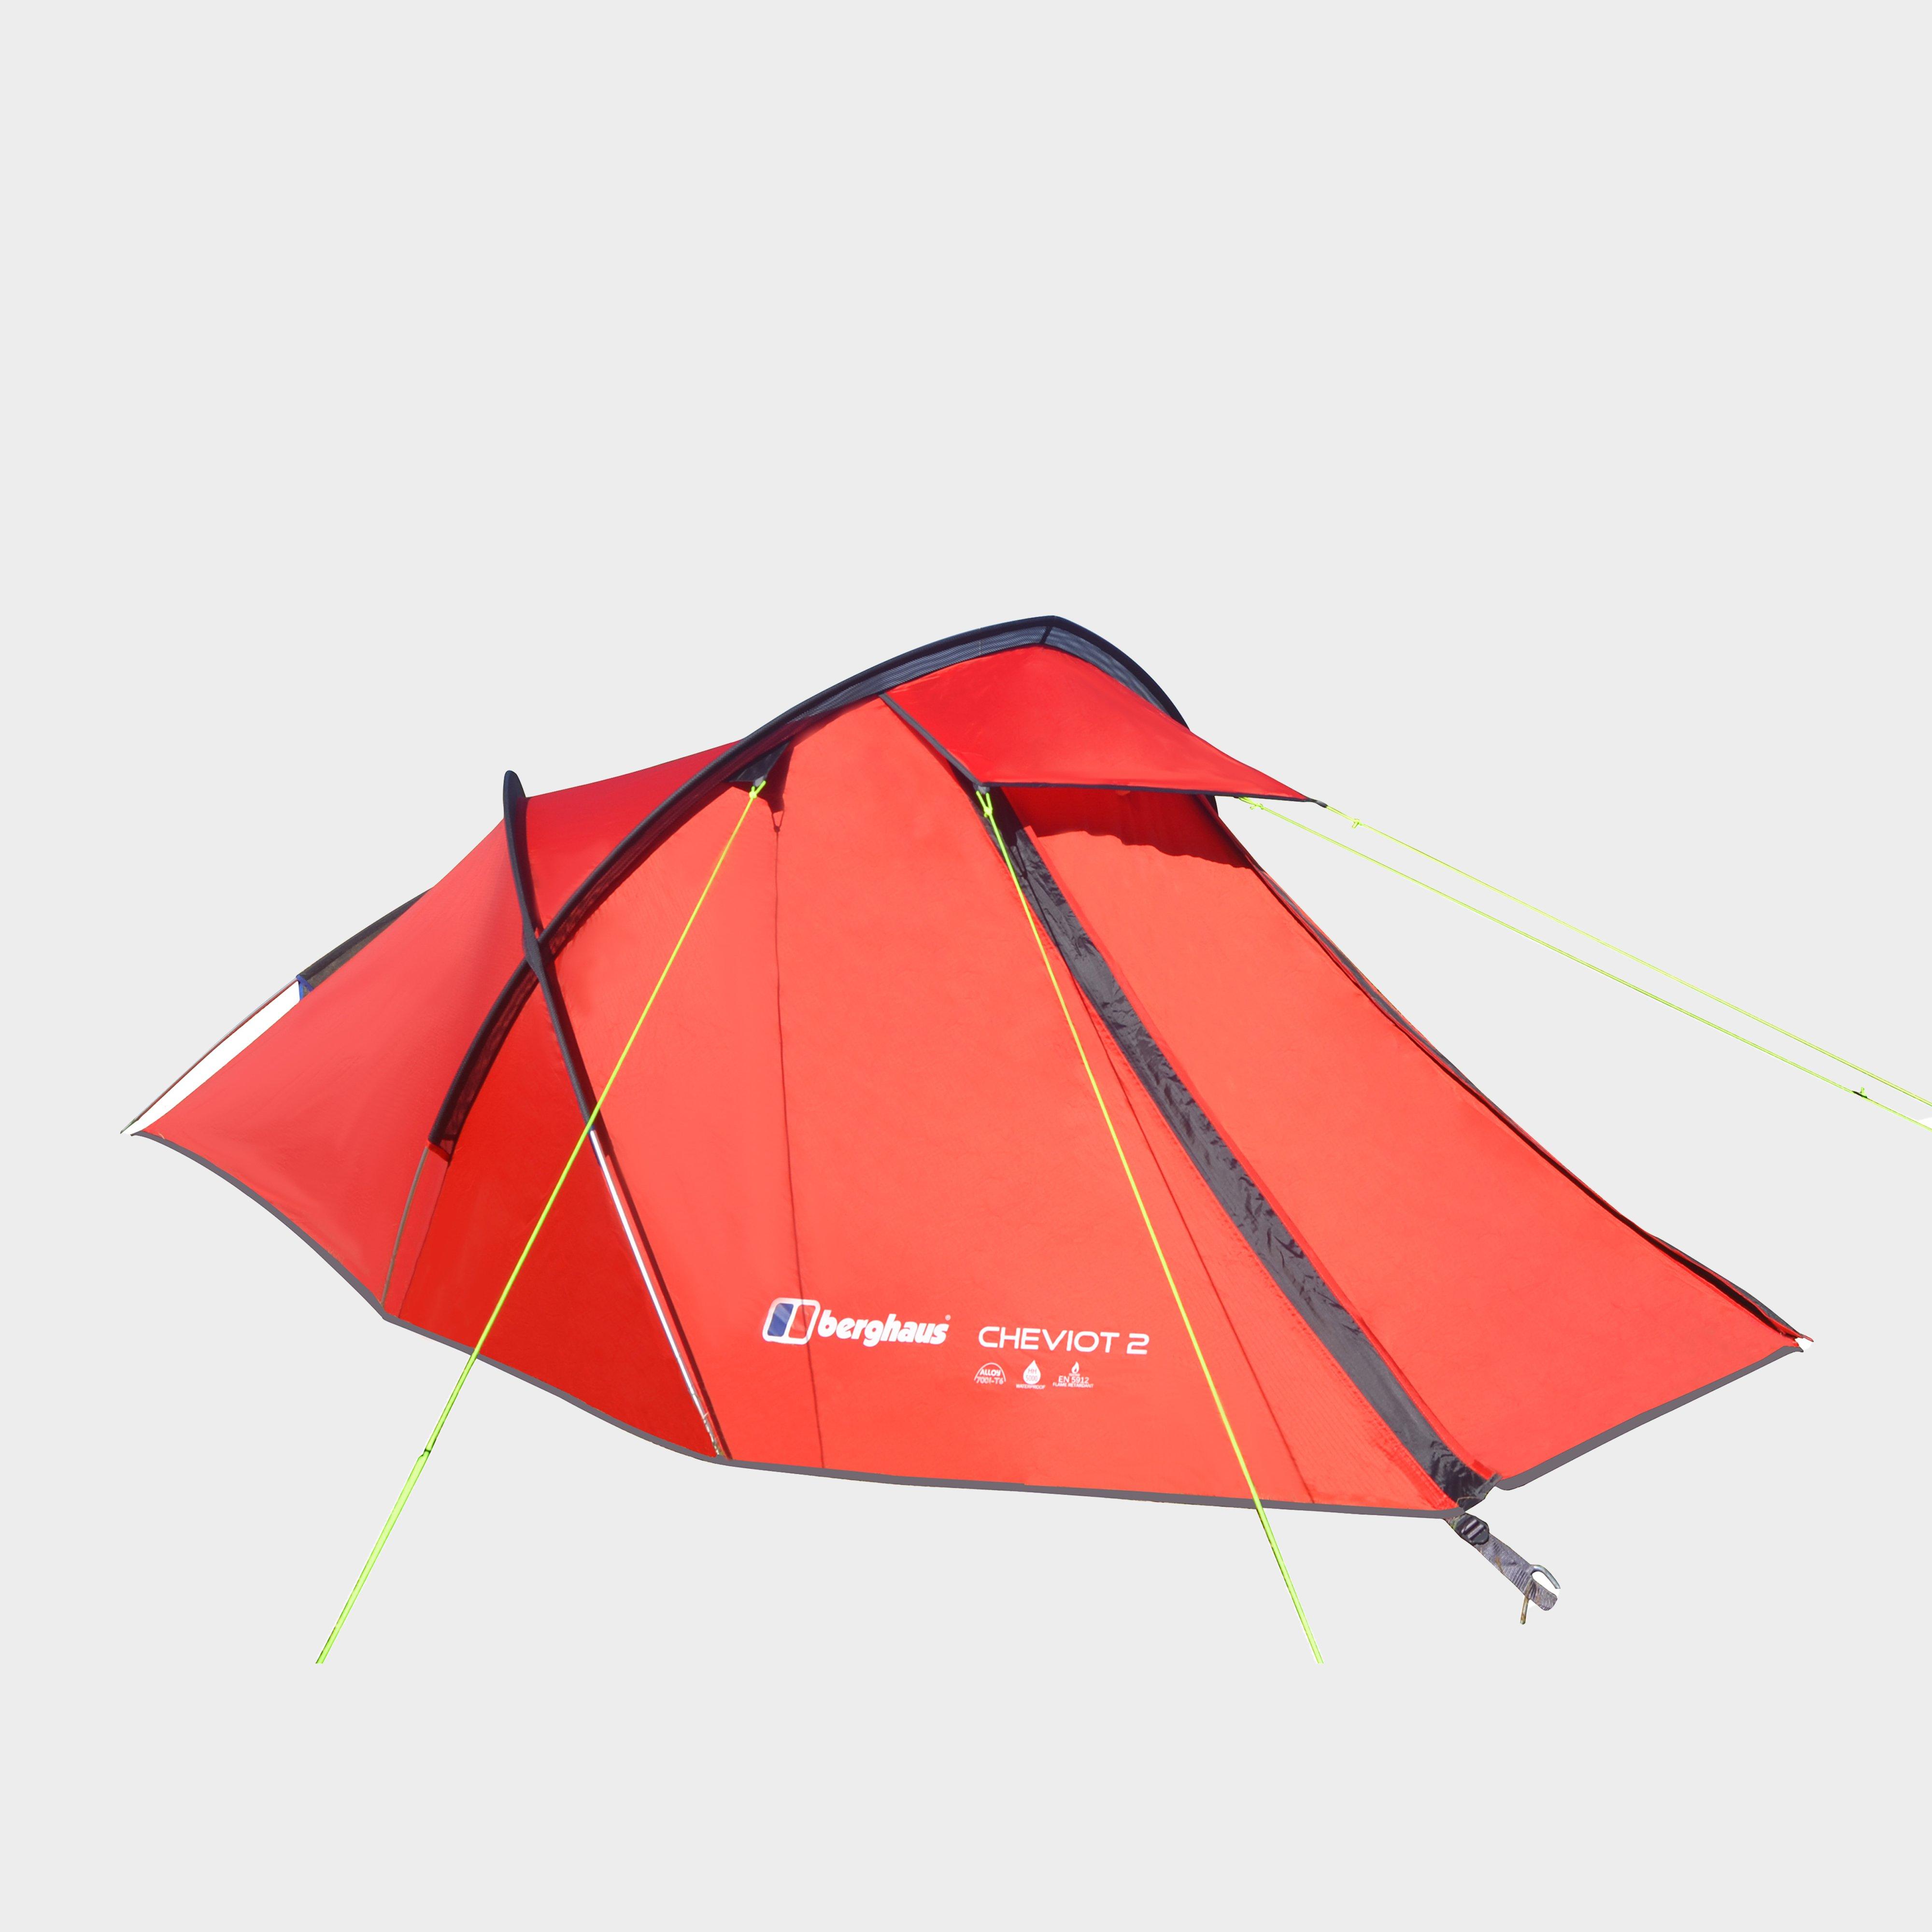 Berghaus Cheviot 2 Tent - Red/red  Red/red